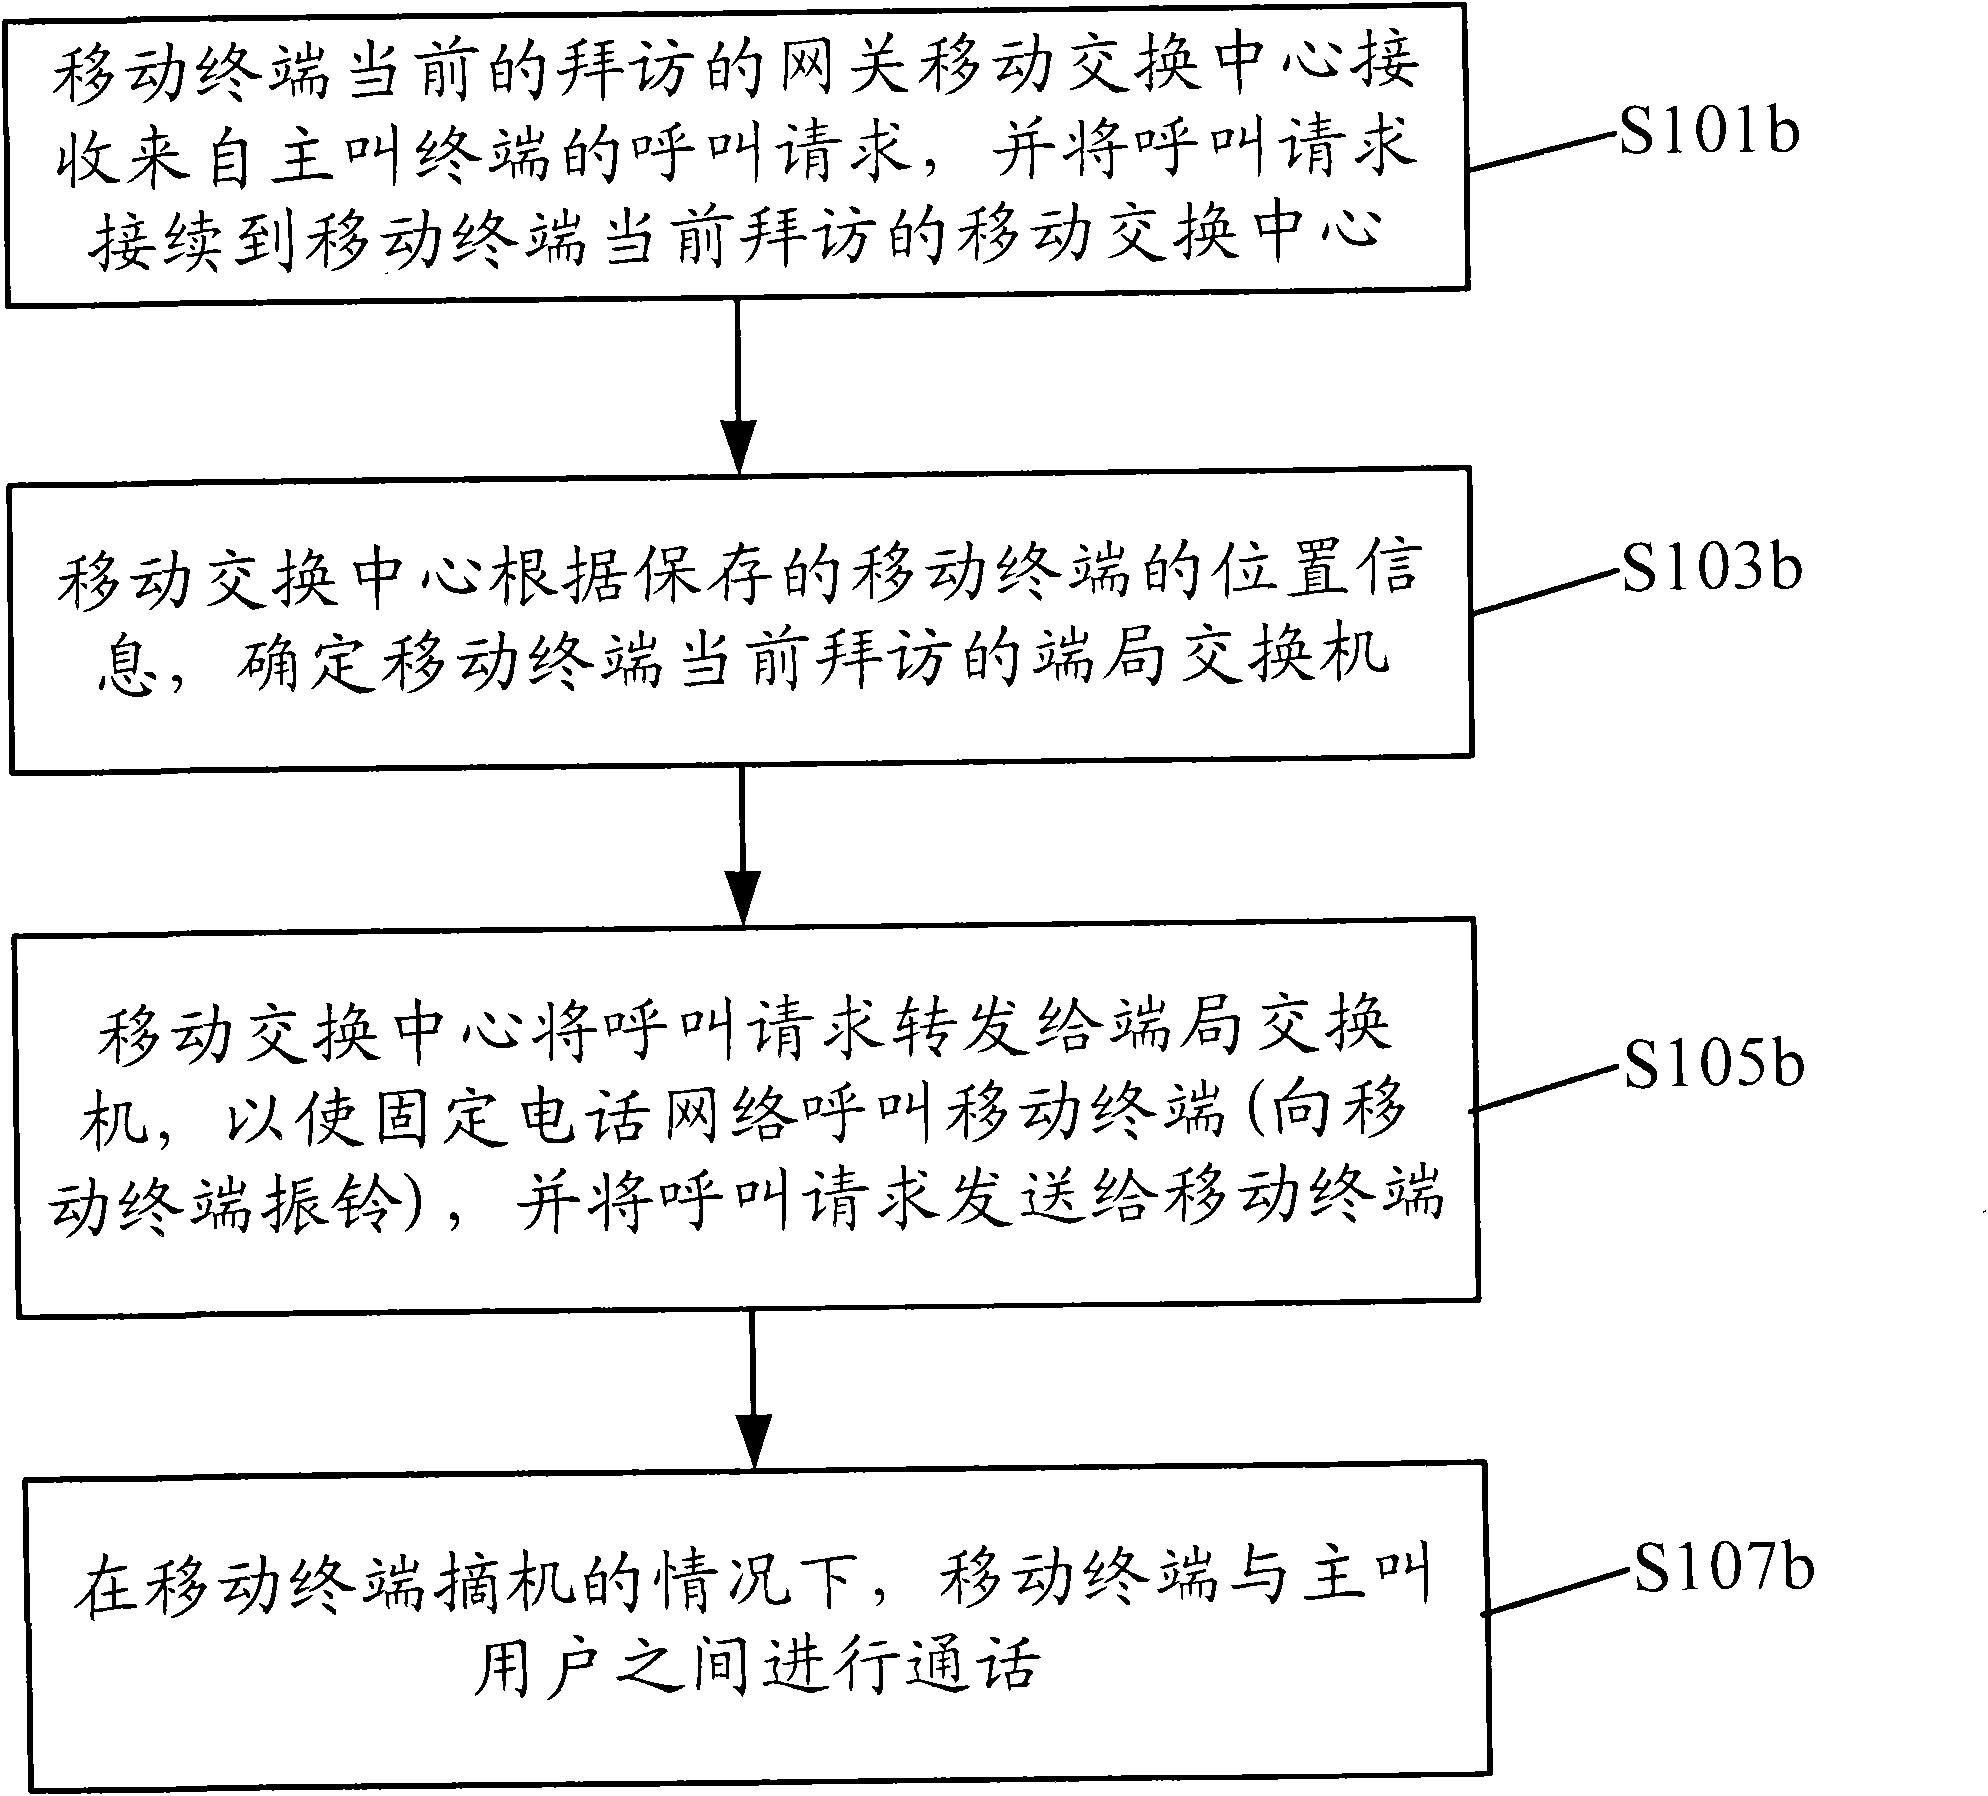 Calling method and system for mobile terminal in fixed telephone network